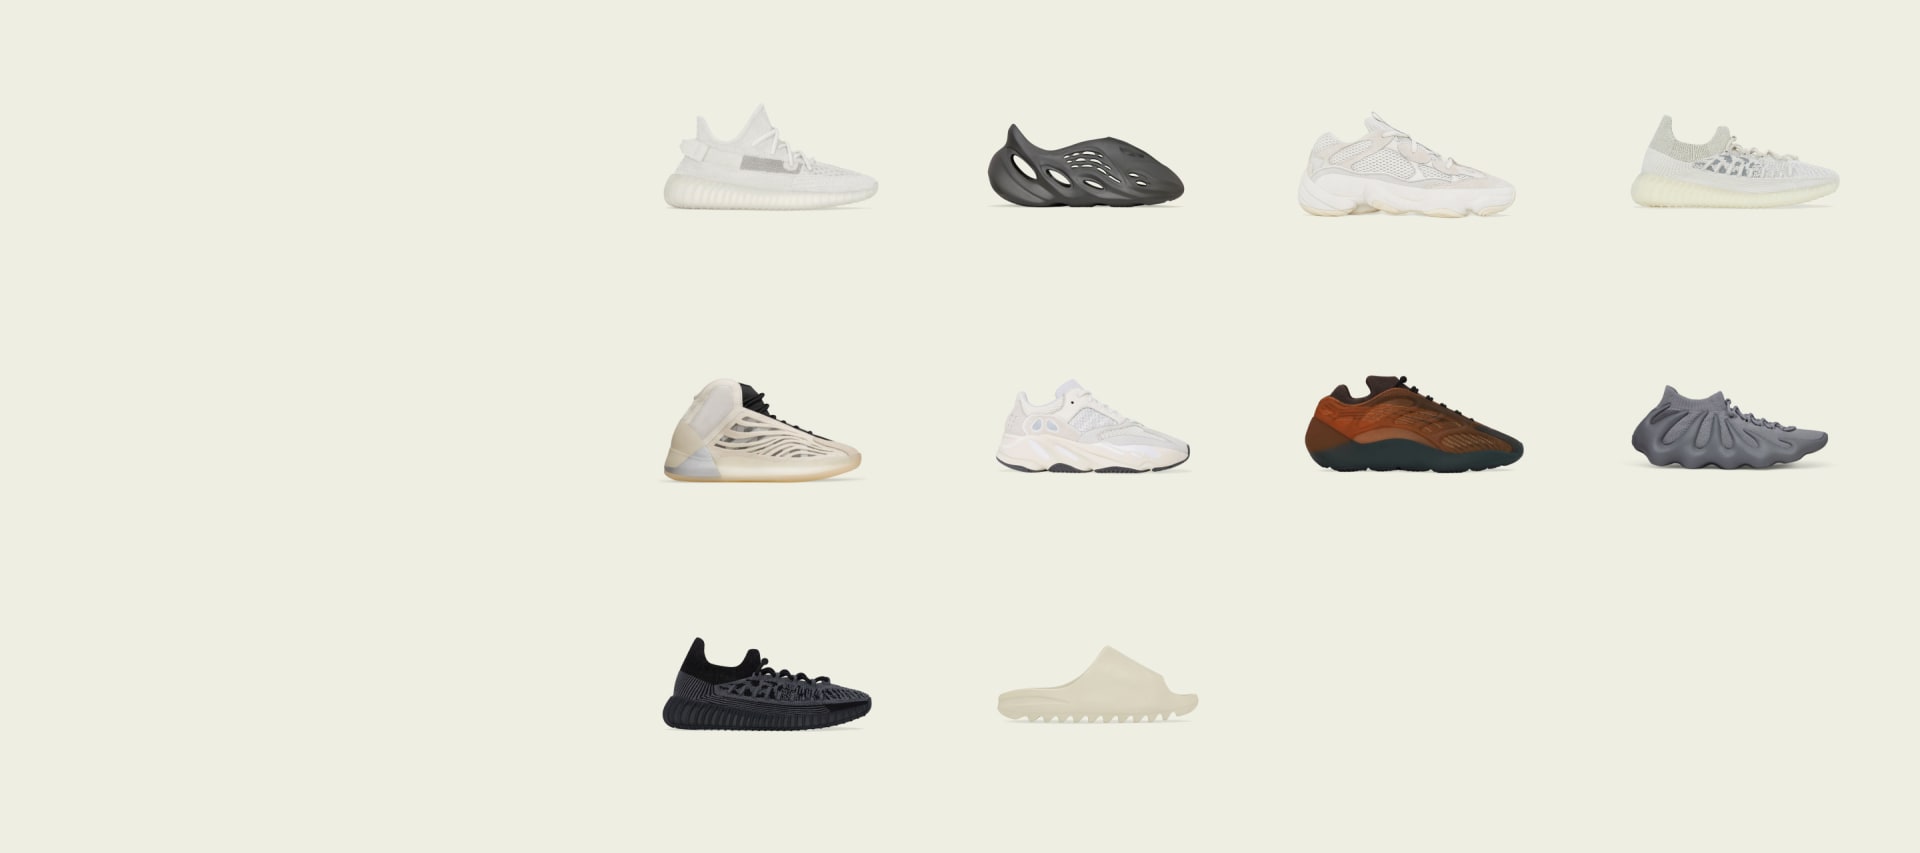 Various shoes from the adidas Yeezy collection